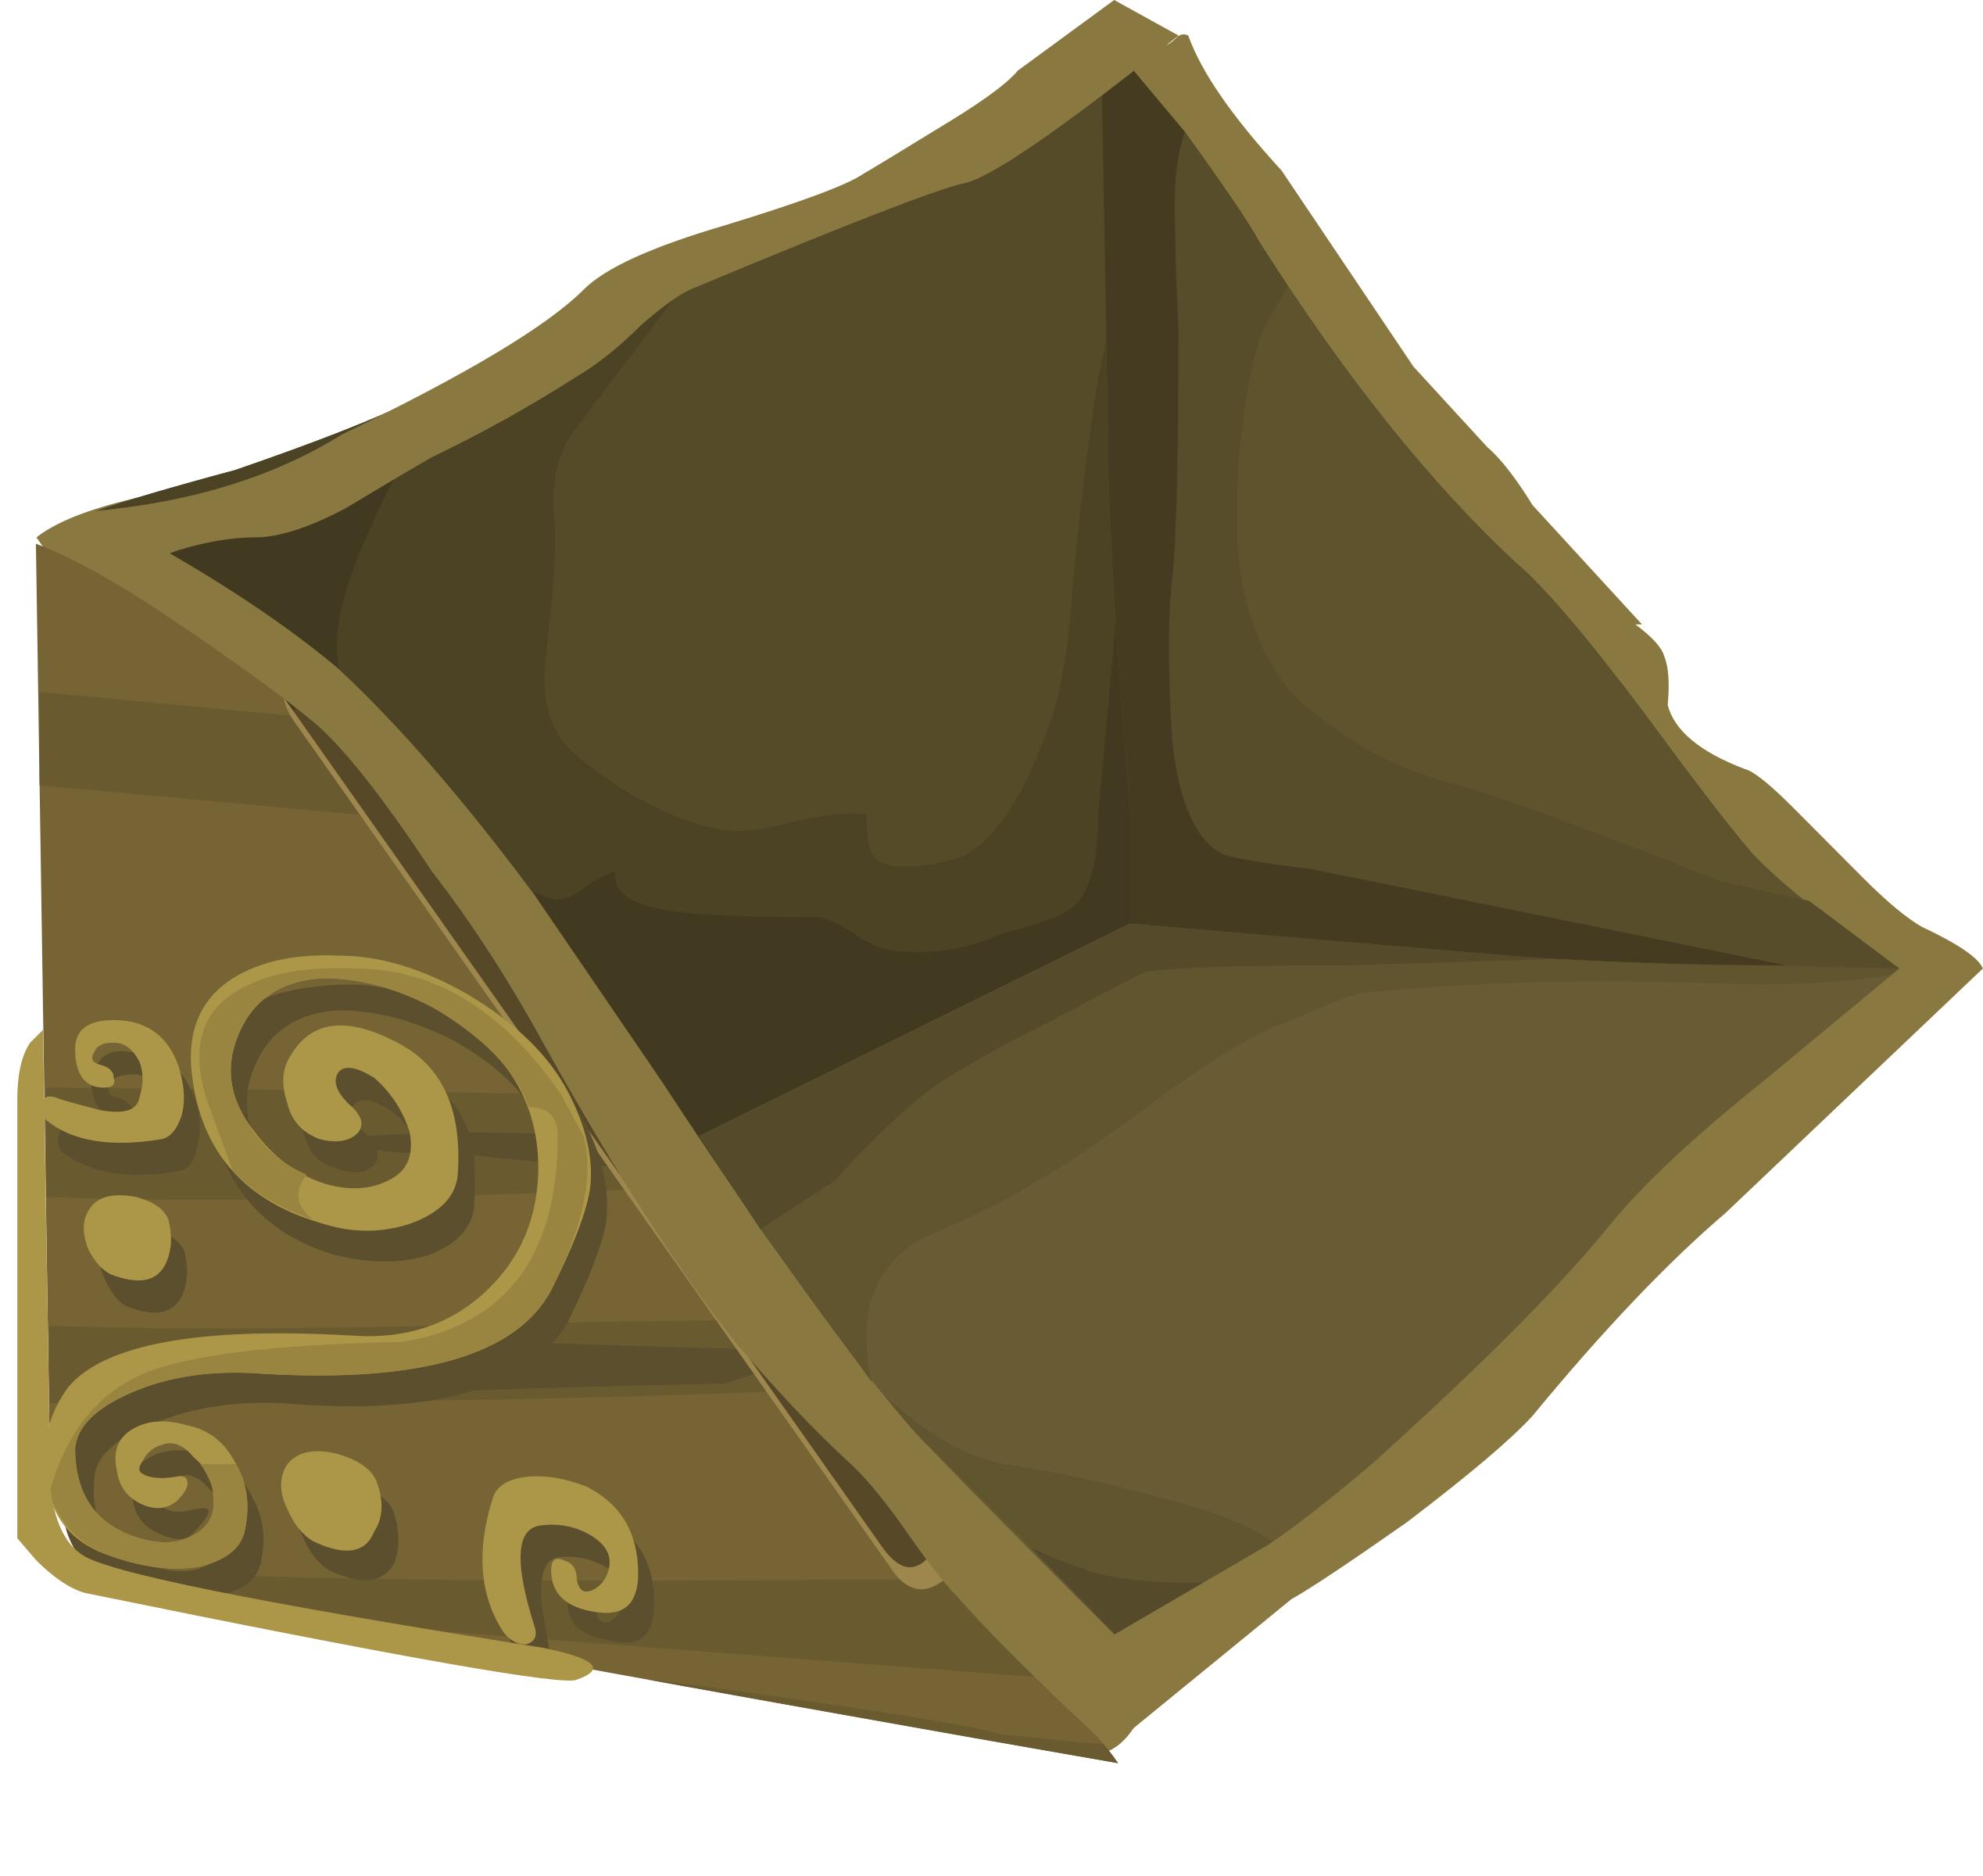 Artifact Mysterious Cube Piece3 png